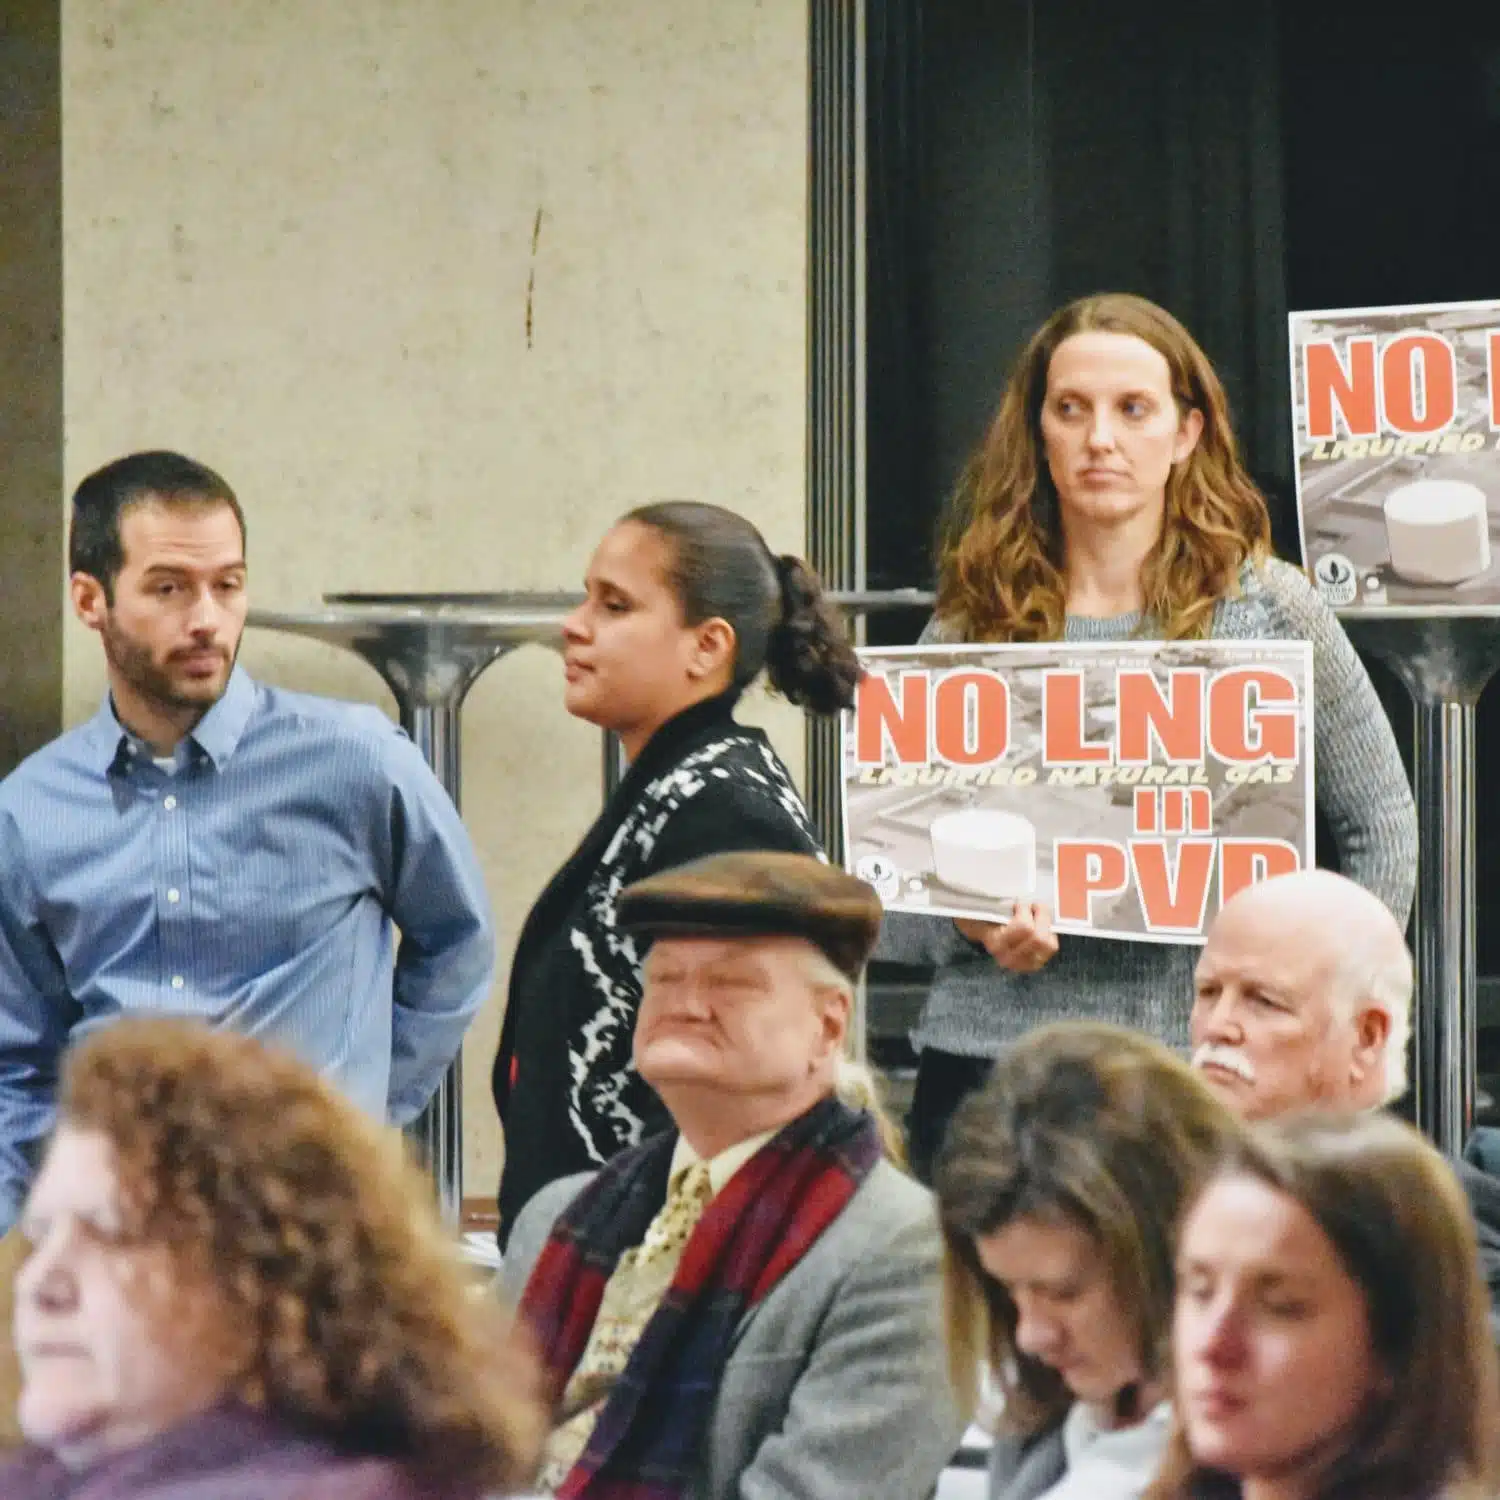 CRMC hearing consumed by public testimony against National Grid’s Port project